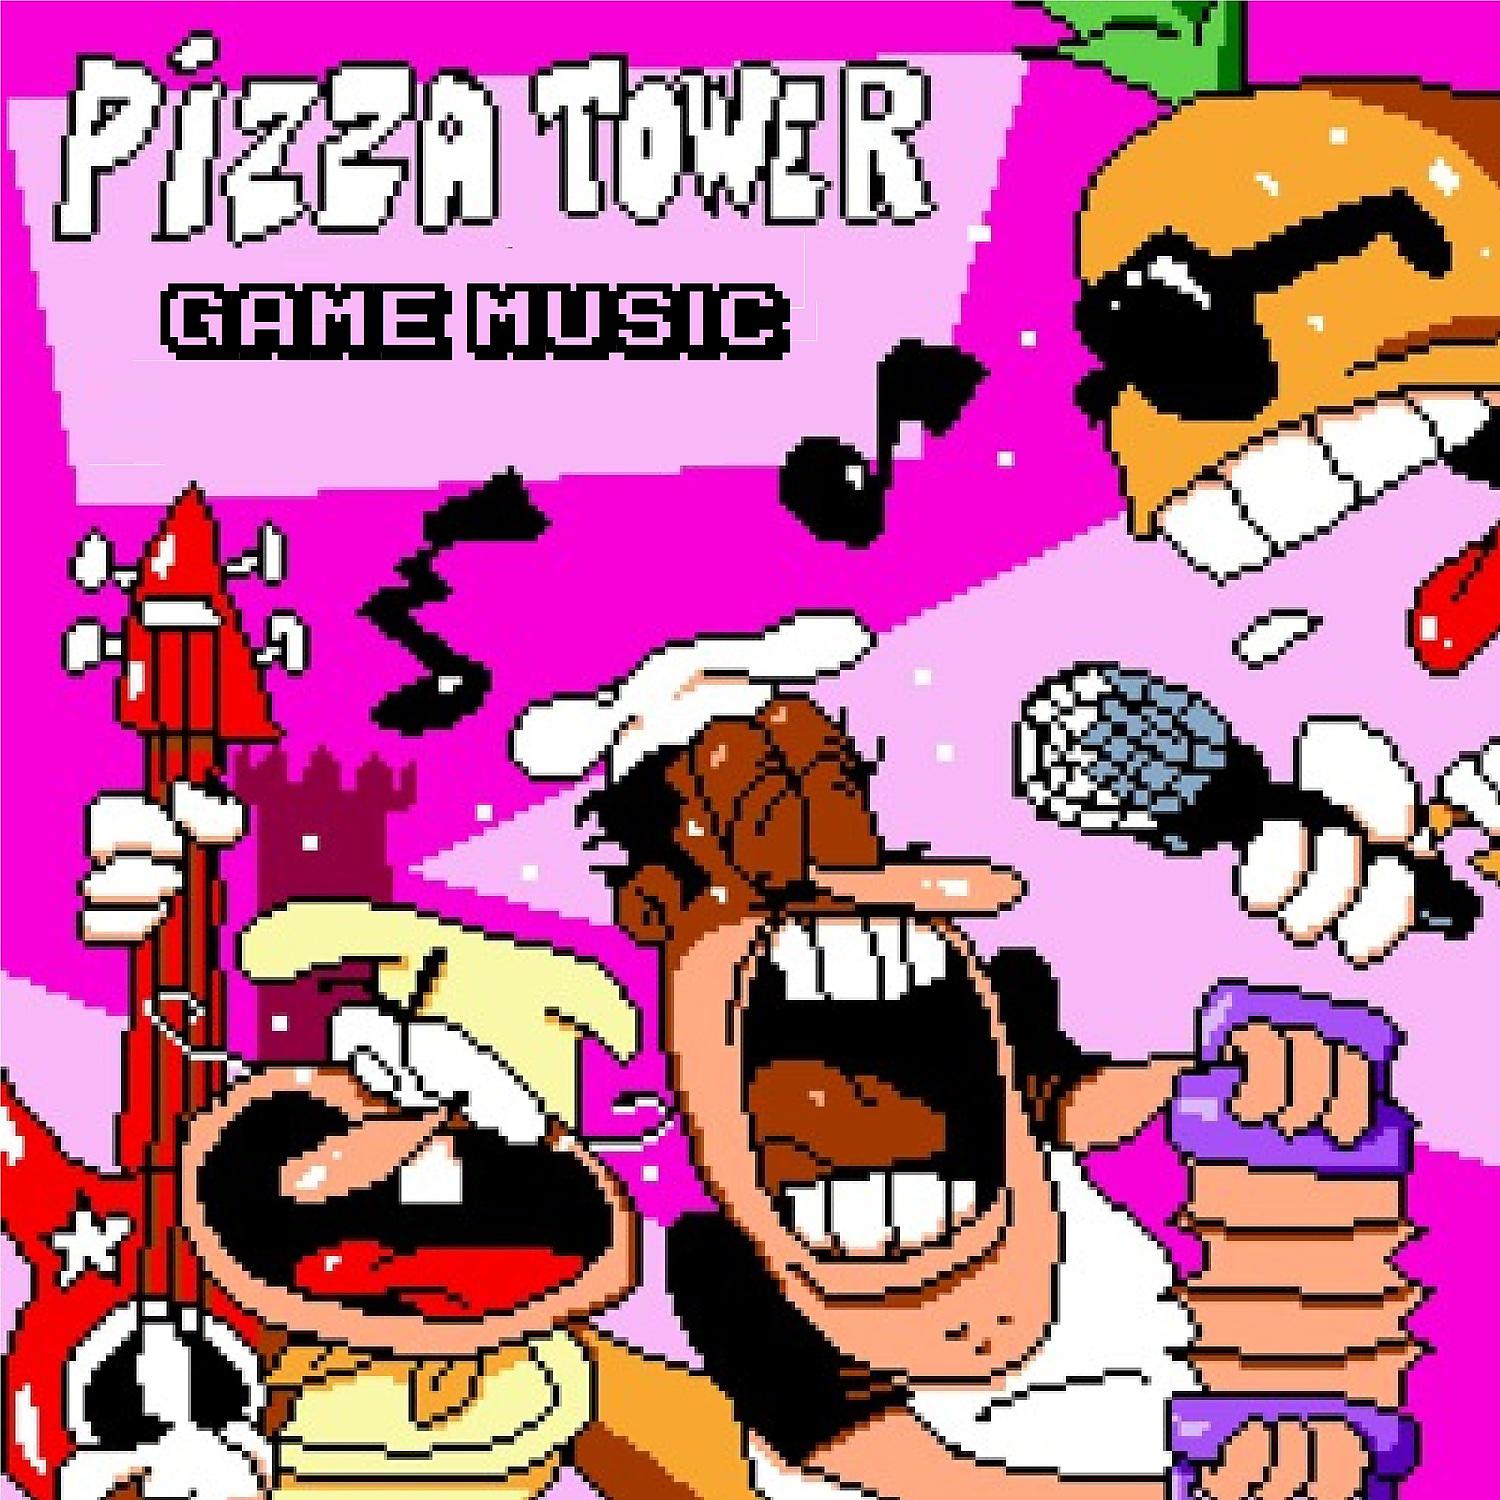 Pizza tower ost noise. Pizza Tower OST. Pizza Tower русская версия. Peppino pizza Tower. Pizza Tower игра.